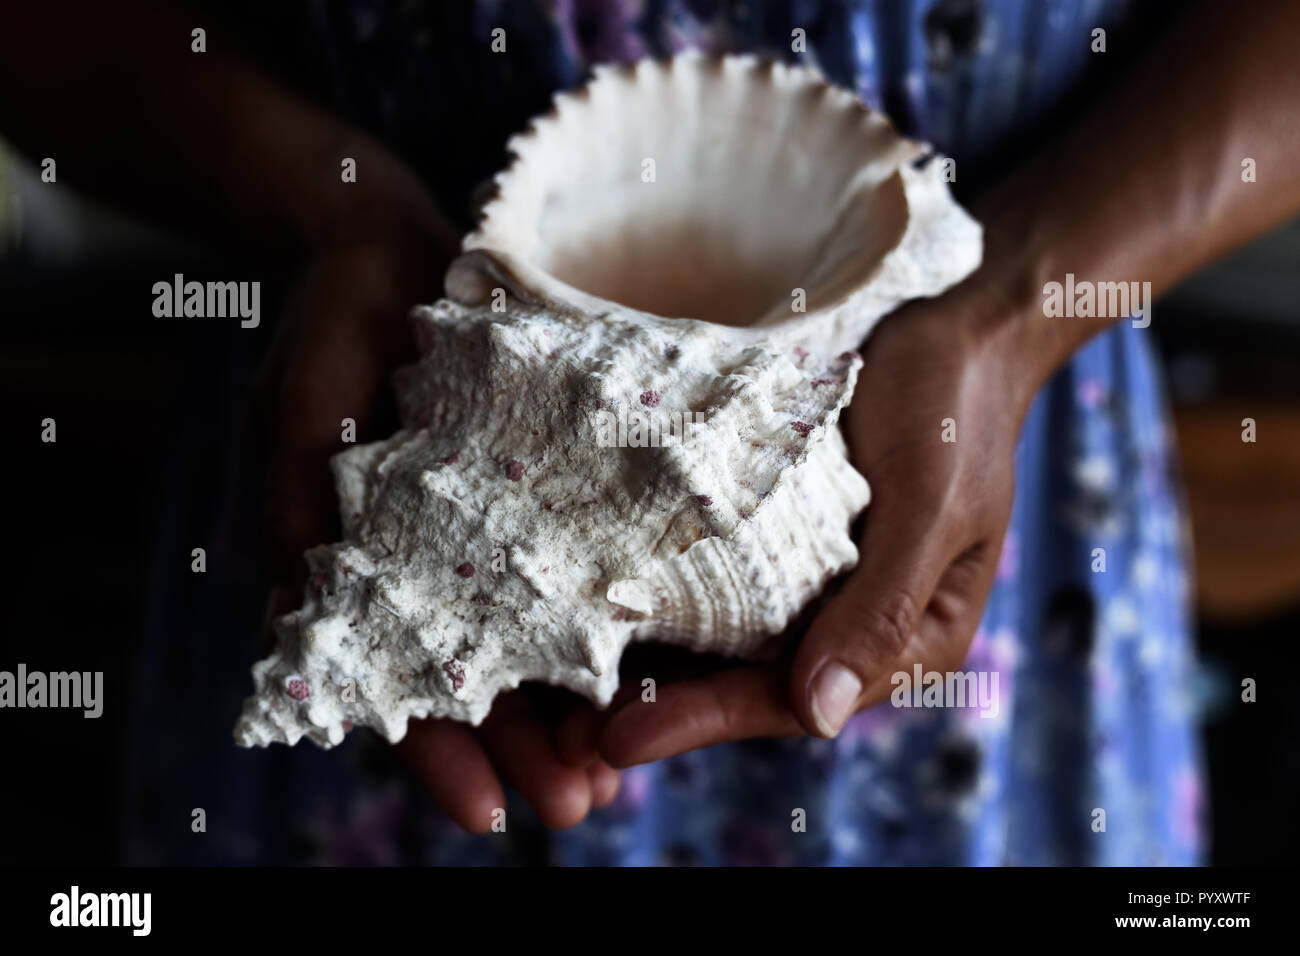 Close up of woman's hands holding pretty, white seashell Stock Photo